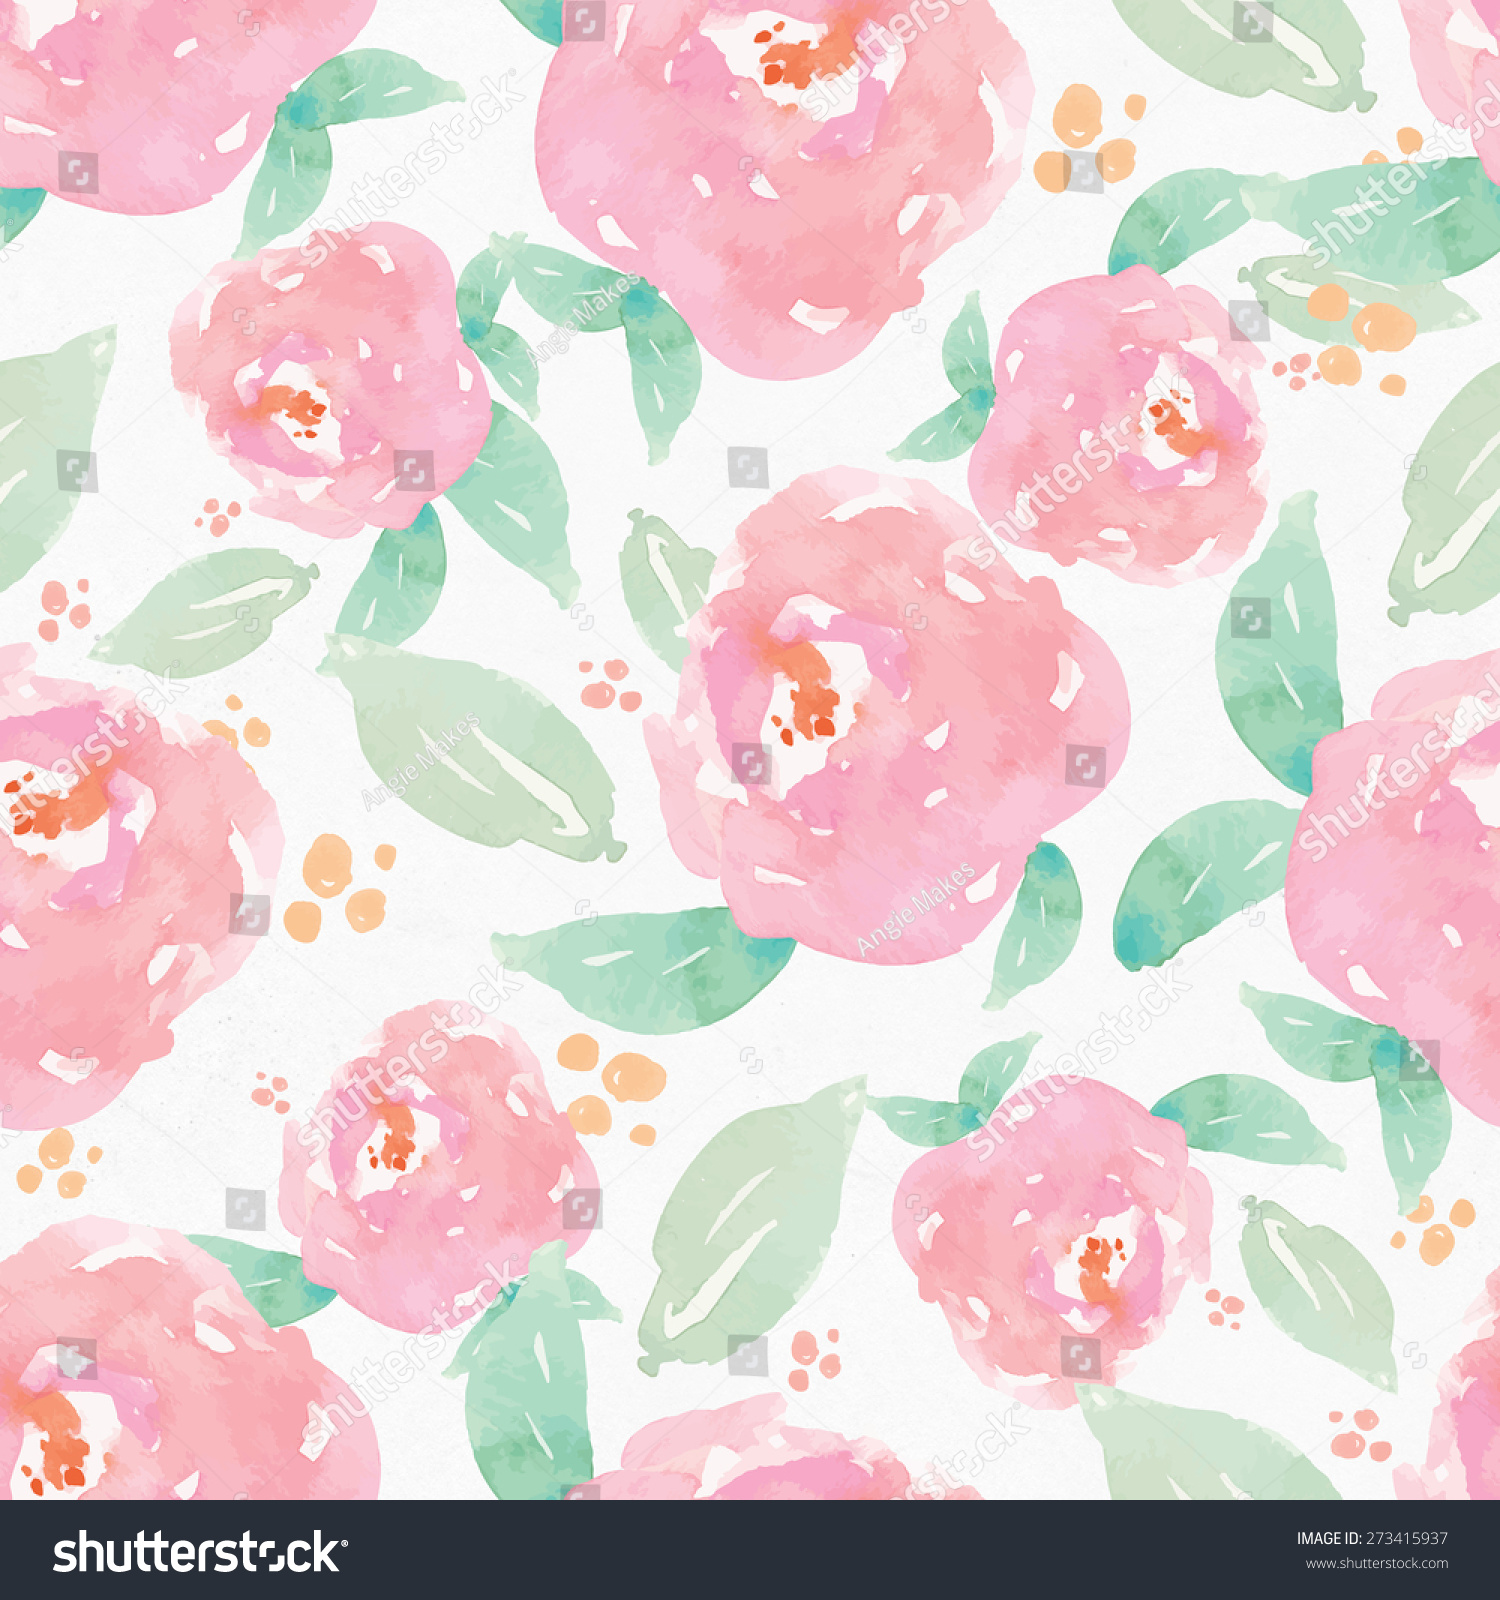 Repeating Watercolor Flower Background Pattern Watercolour Stock ...